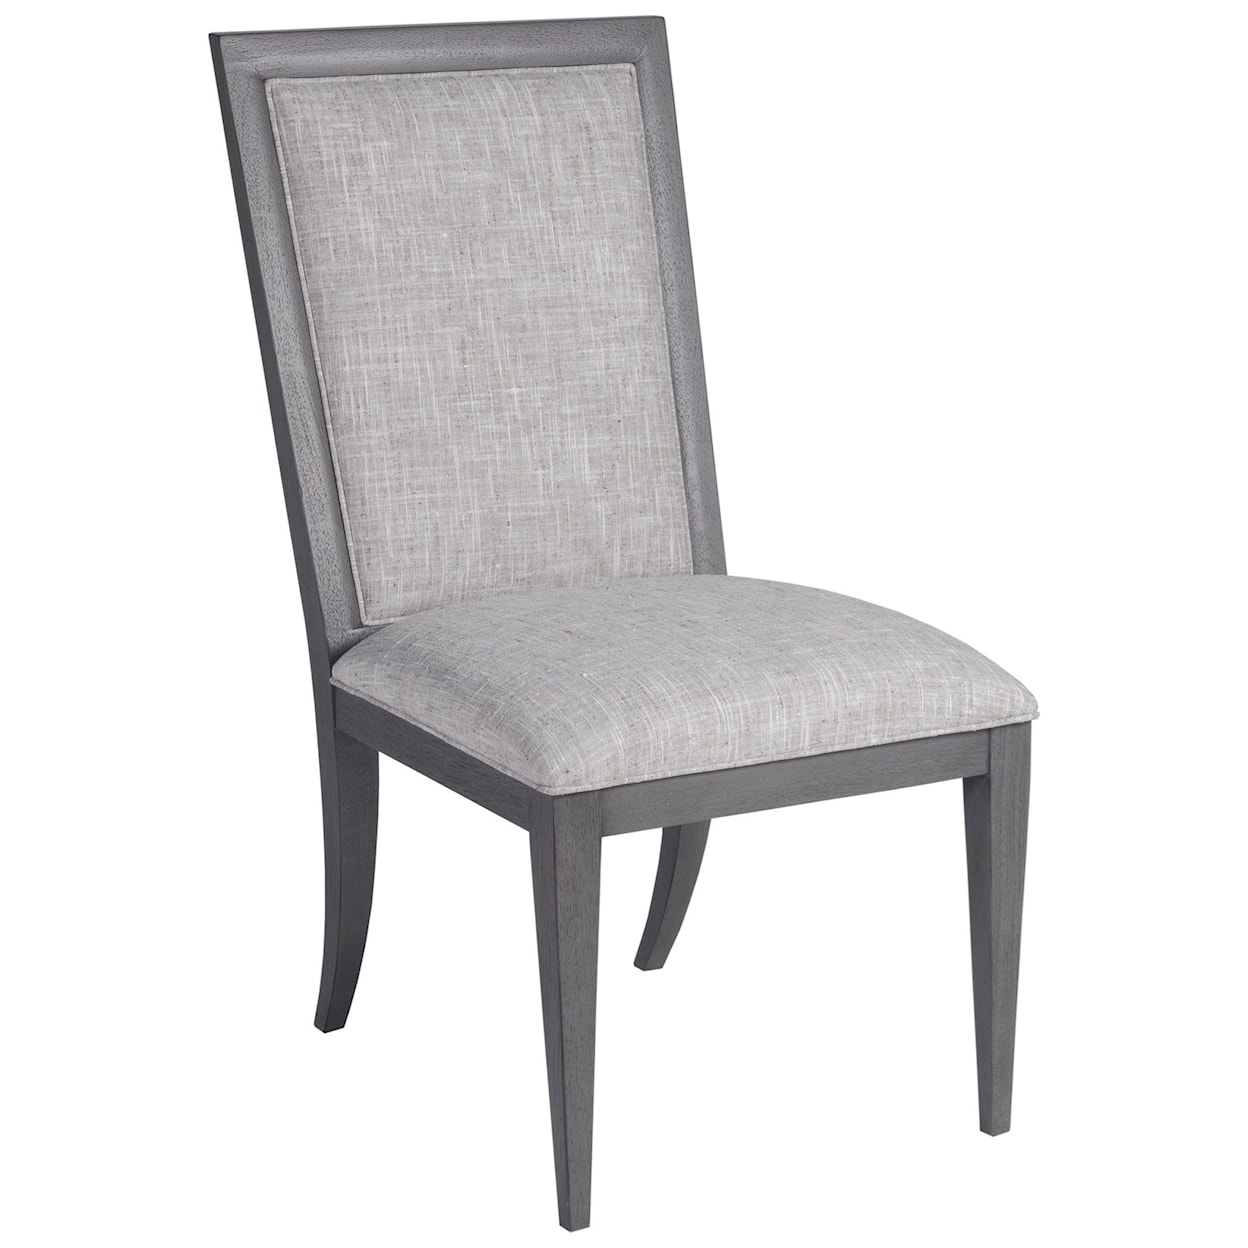 Artistica Appellation Upholstered Side Chair